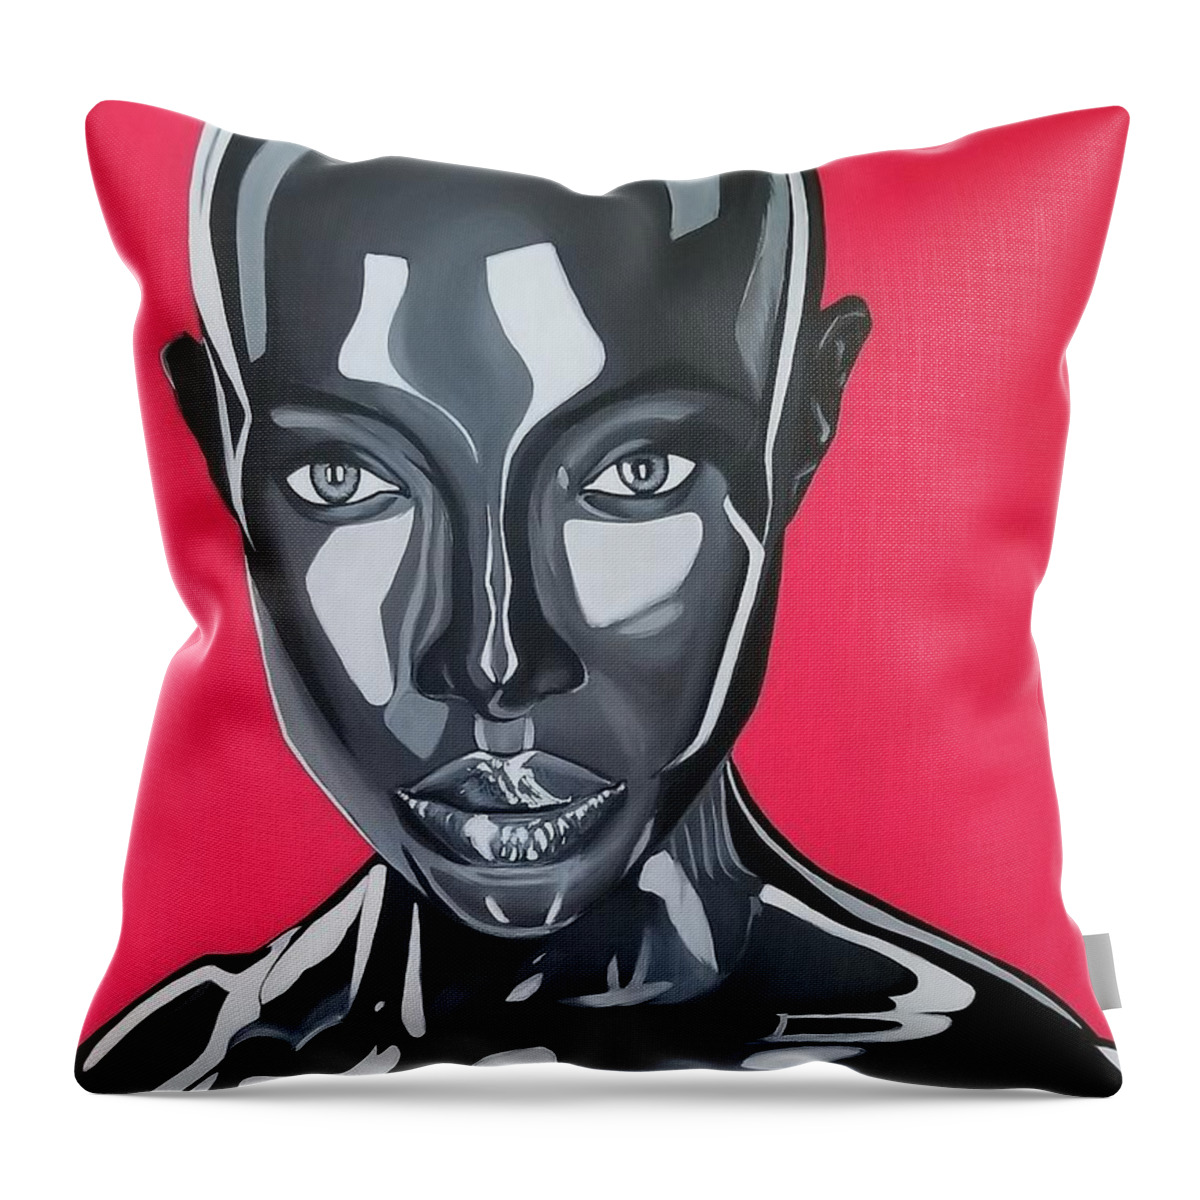  Throw Pillow featuring the painting Prototype by Bryon Stewart